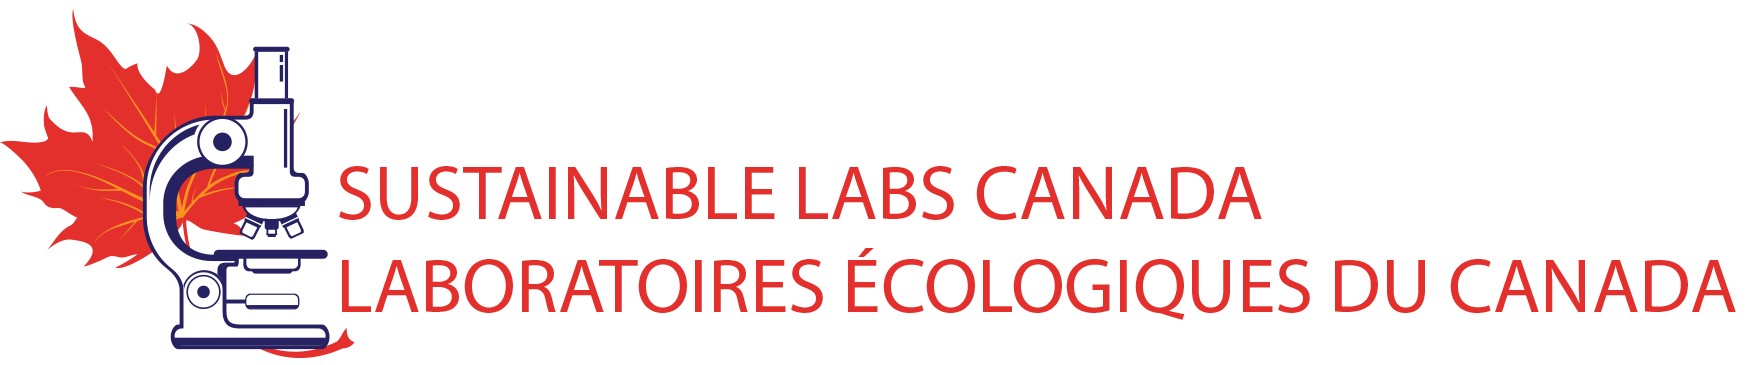 Sustainable Labs Canada